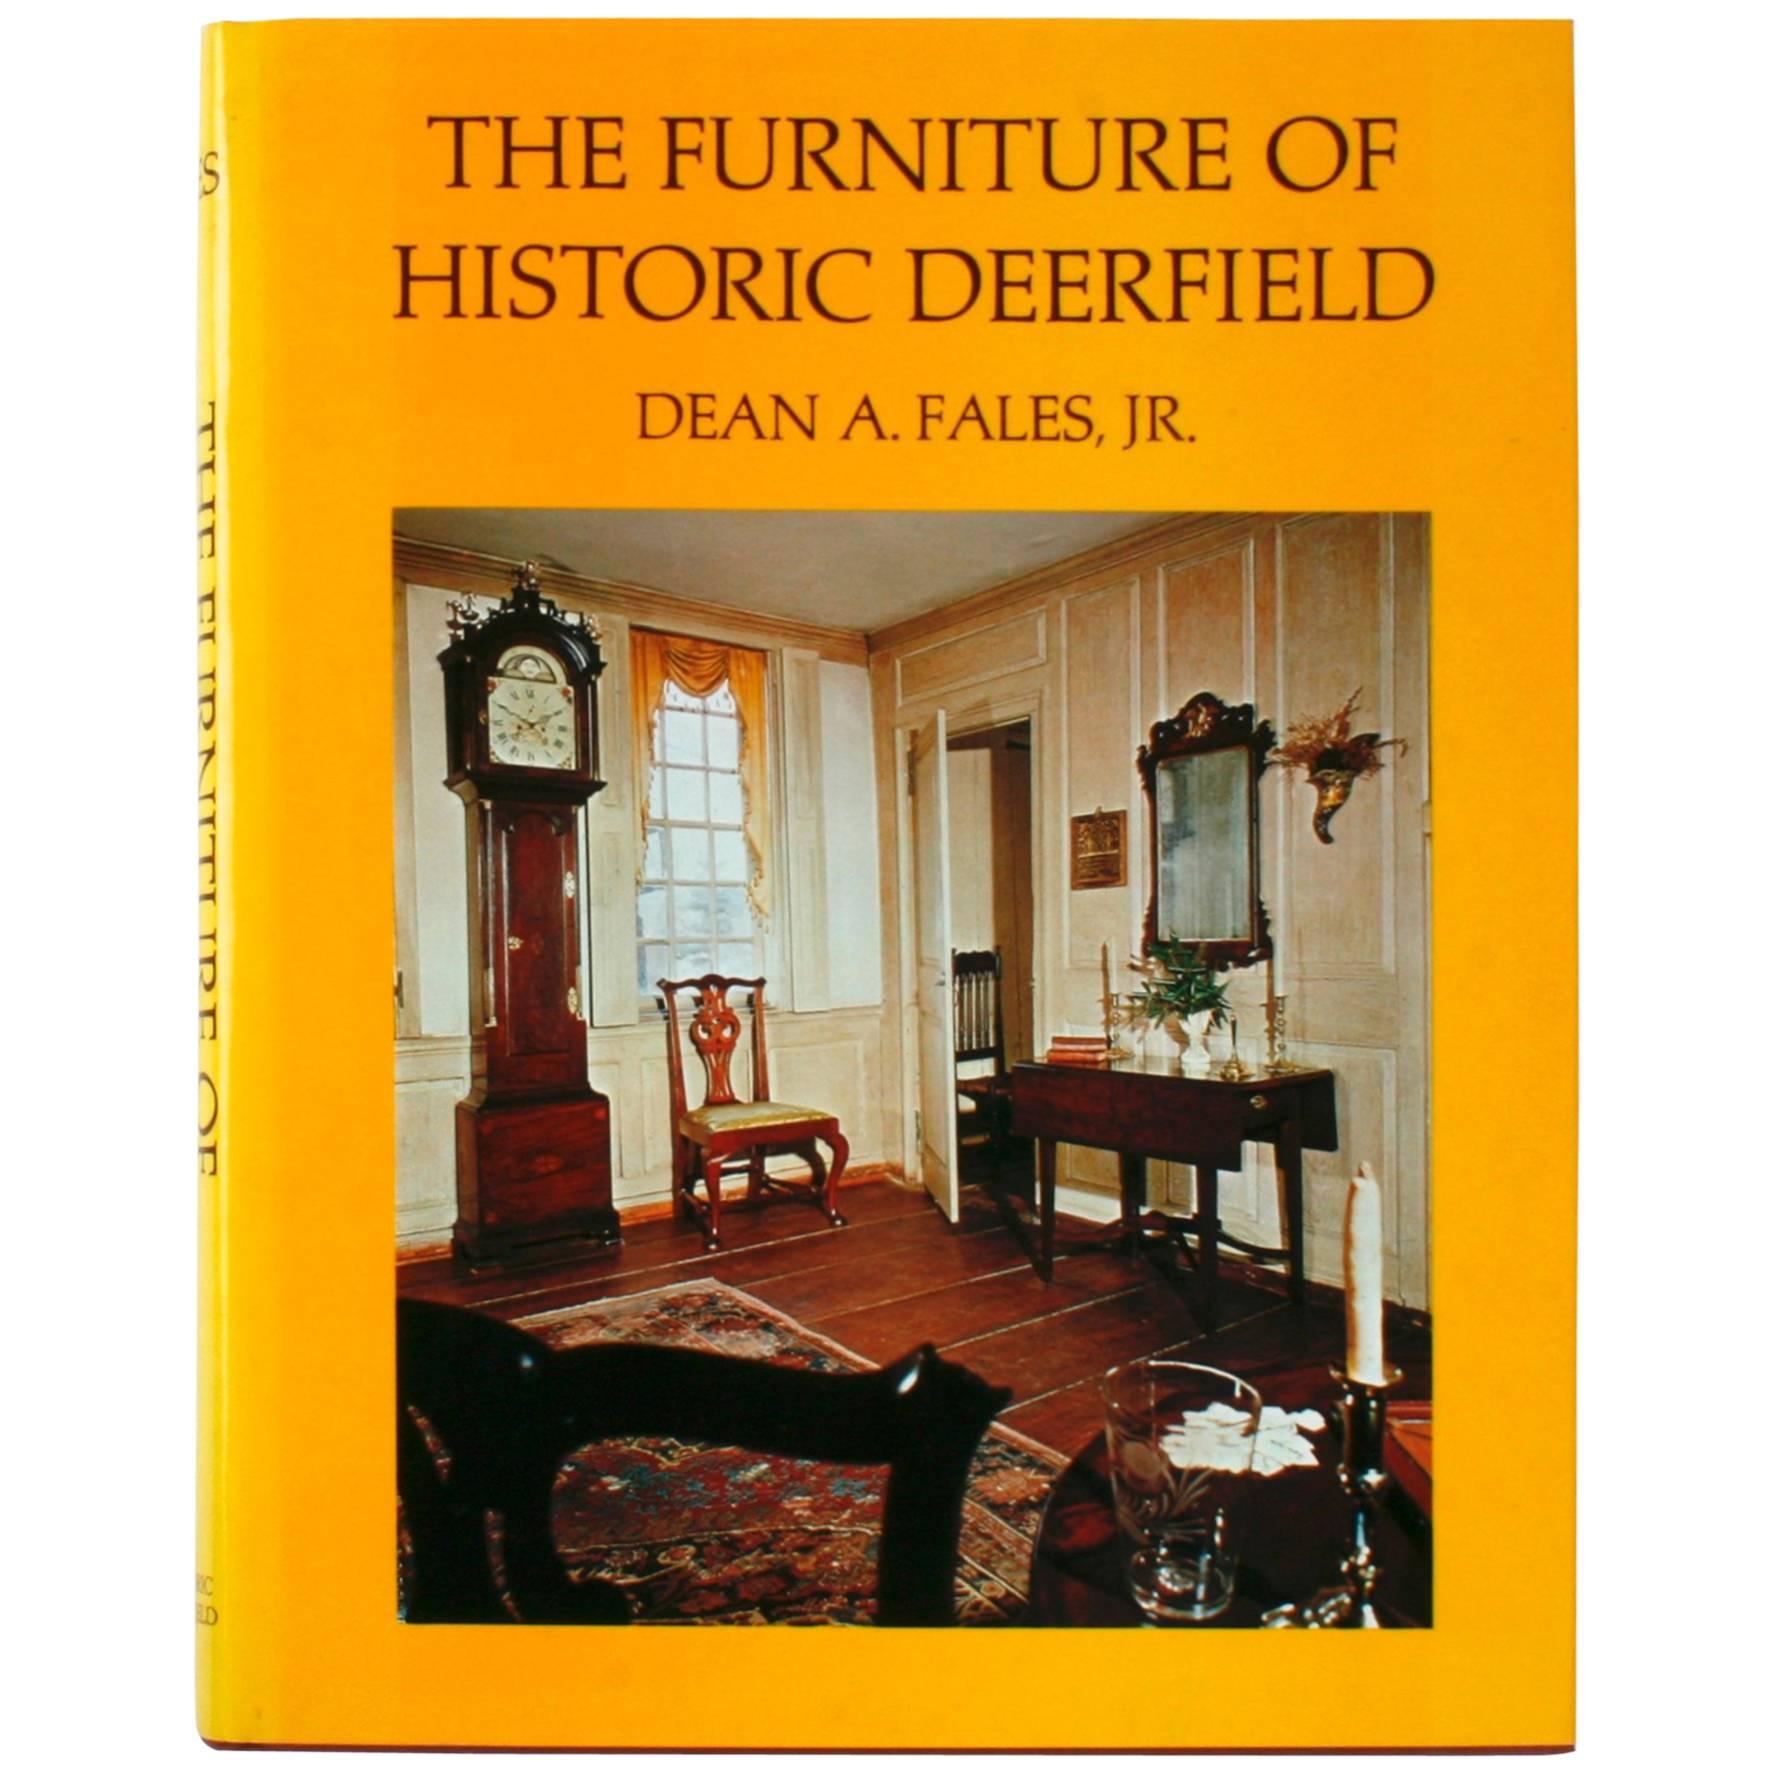 Furniture of Historic Deerfield by Dean A. Fales, Jr.